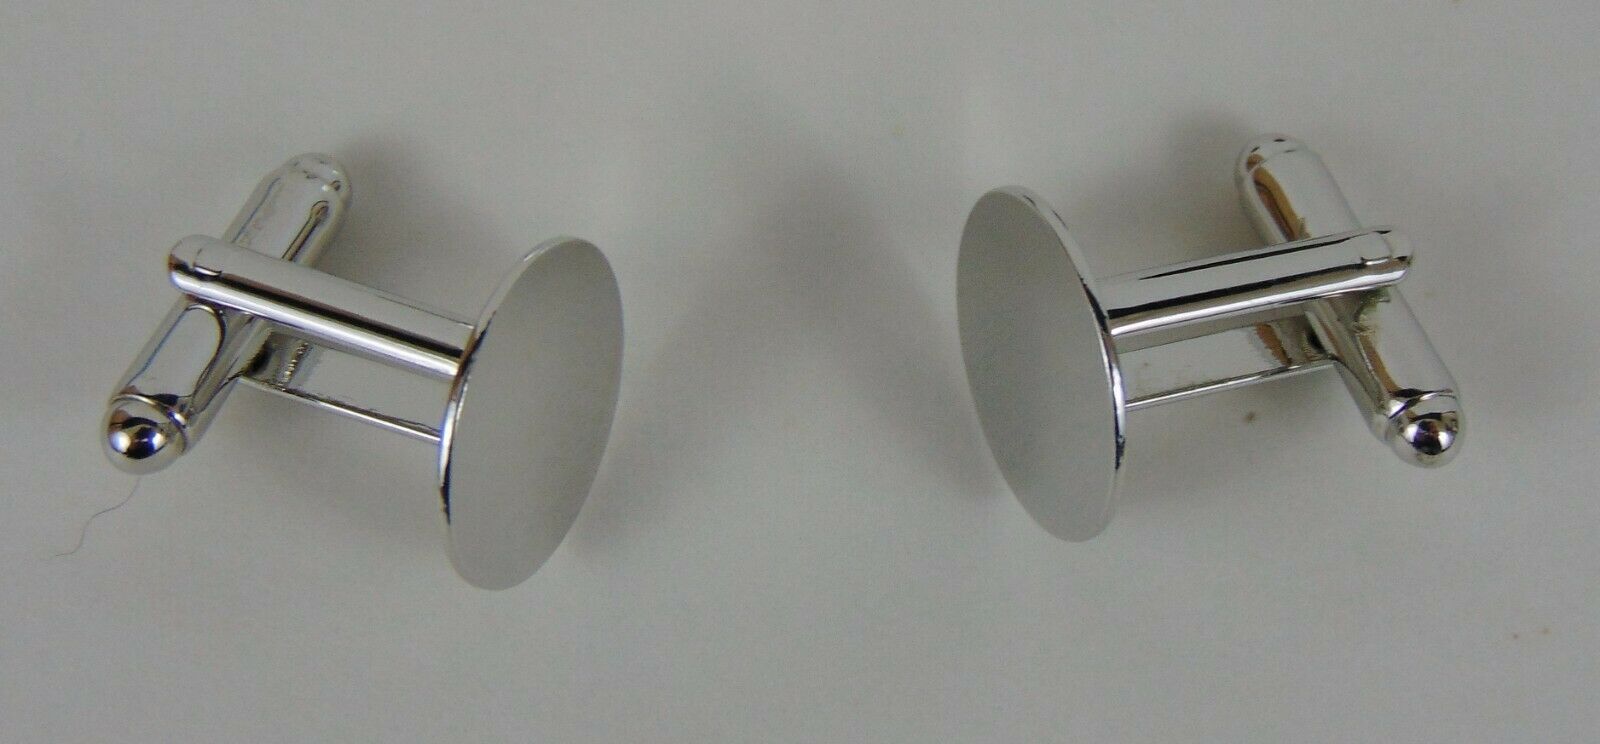 24 Silver Metal Cuff Links Findings Blank 15mm Round Flat Glueable Pad  12 Pairs